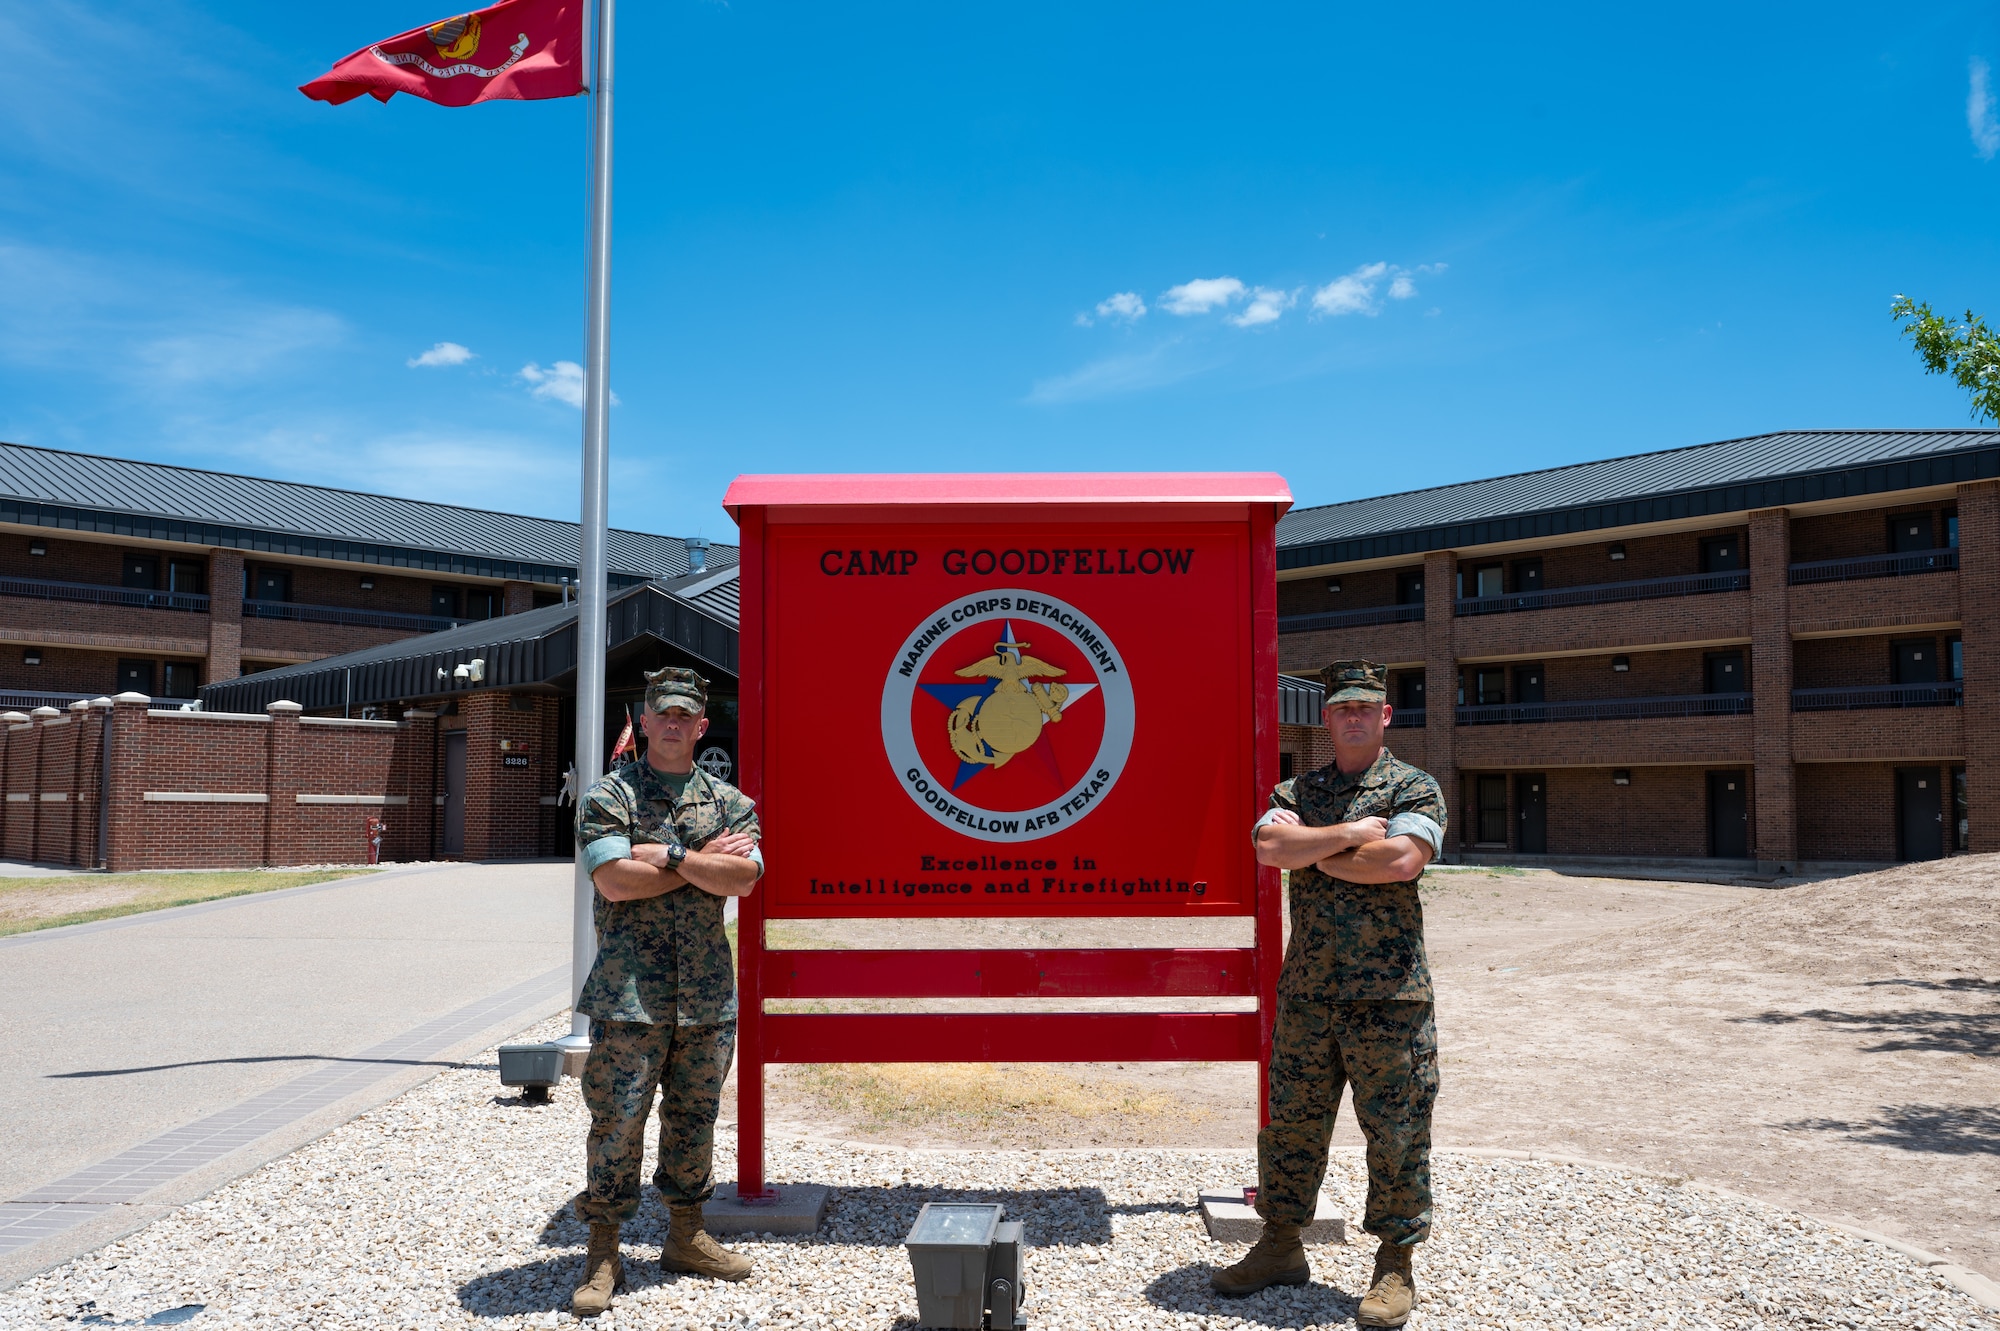 U.S. Marine Corps Master Gunnery Sgt. Darry Cross, Marine Corps Detachment Goodfellow senior enlisted advisor, and Lt. Col. Thomas Coyle, MCD Goodfellow commander, stand together in front of the Camp Goodfellow sign, Goodfellow Air Force Base, Texas, August 1, 2022. MCD Goodfellow consists of over 90 permanent party Marines responsible for facilitating training of multiple military occupational specialties. (U.S. Air Force photo by Senior Airman Michael Bowman)